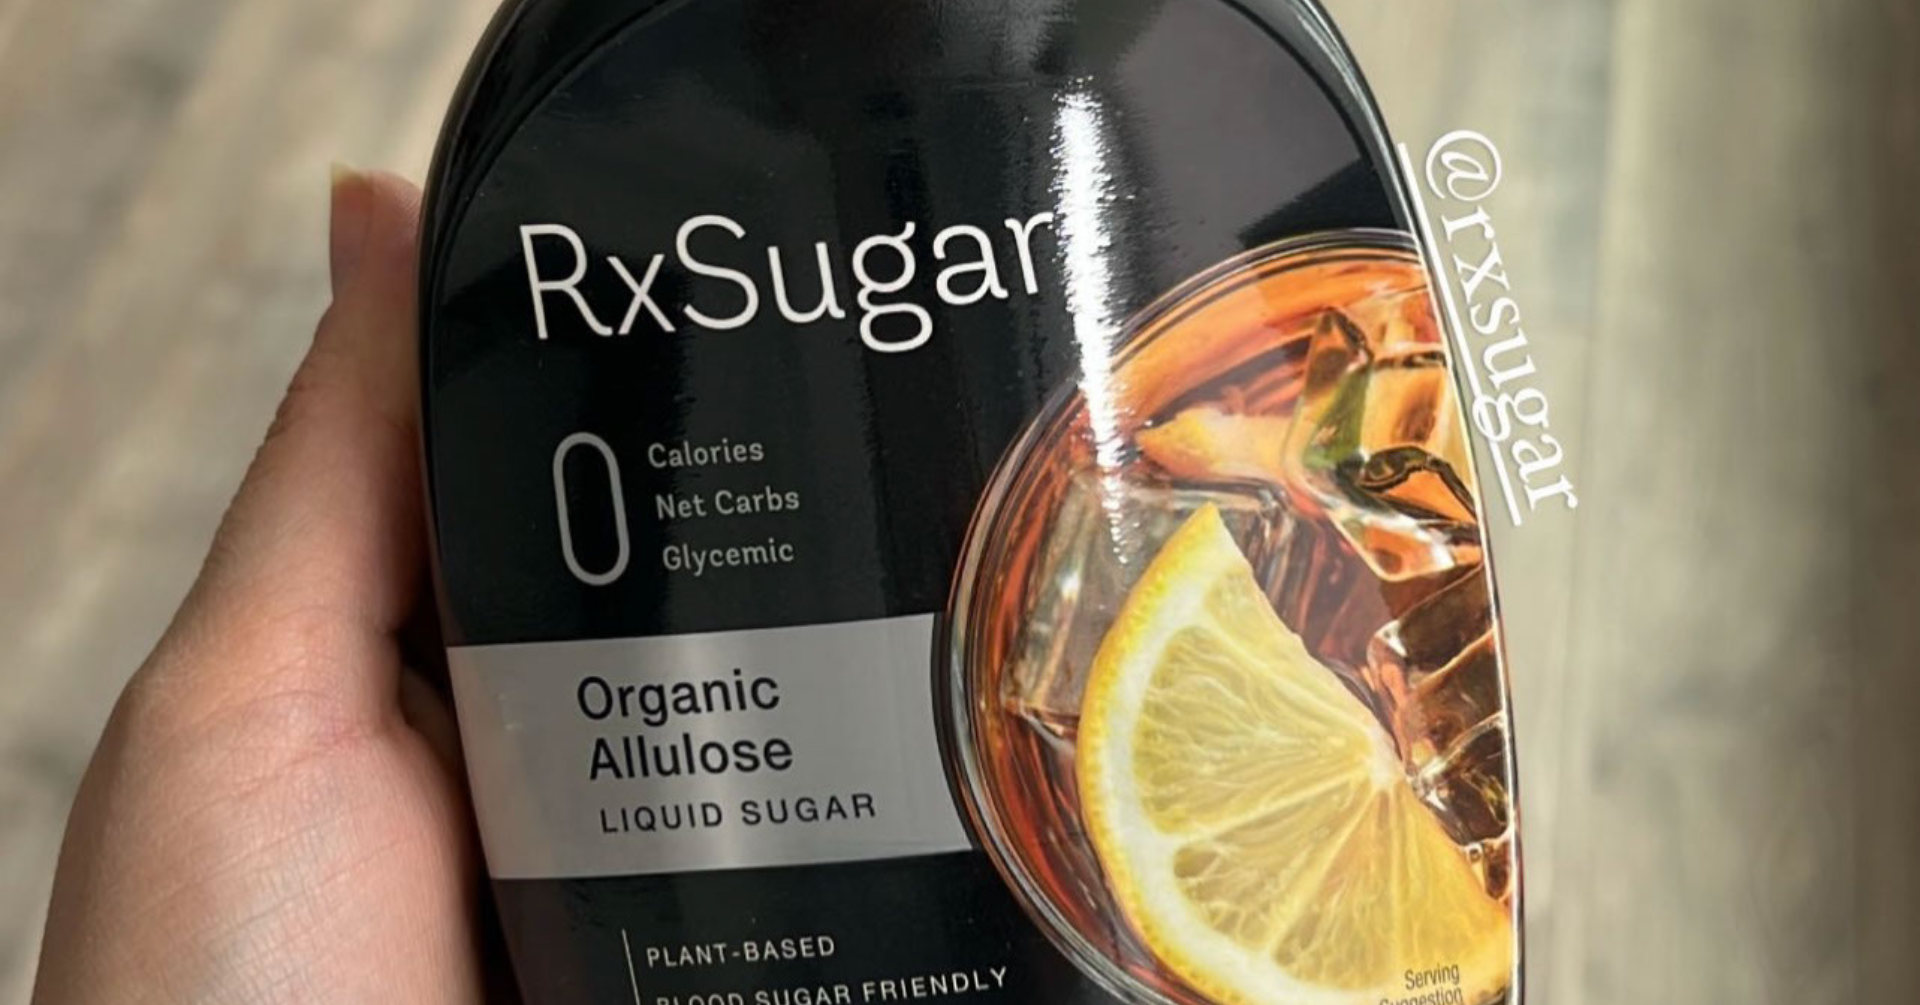 Keto Coach Bre Excited To Try Her RxSugar!